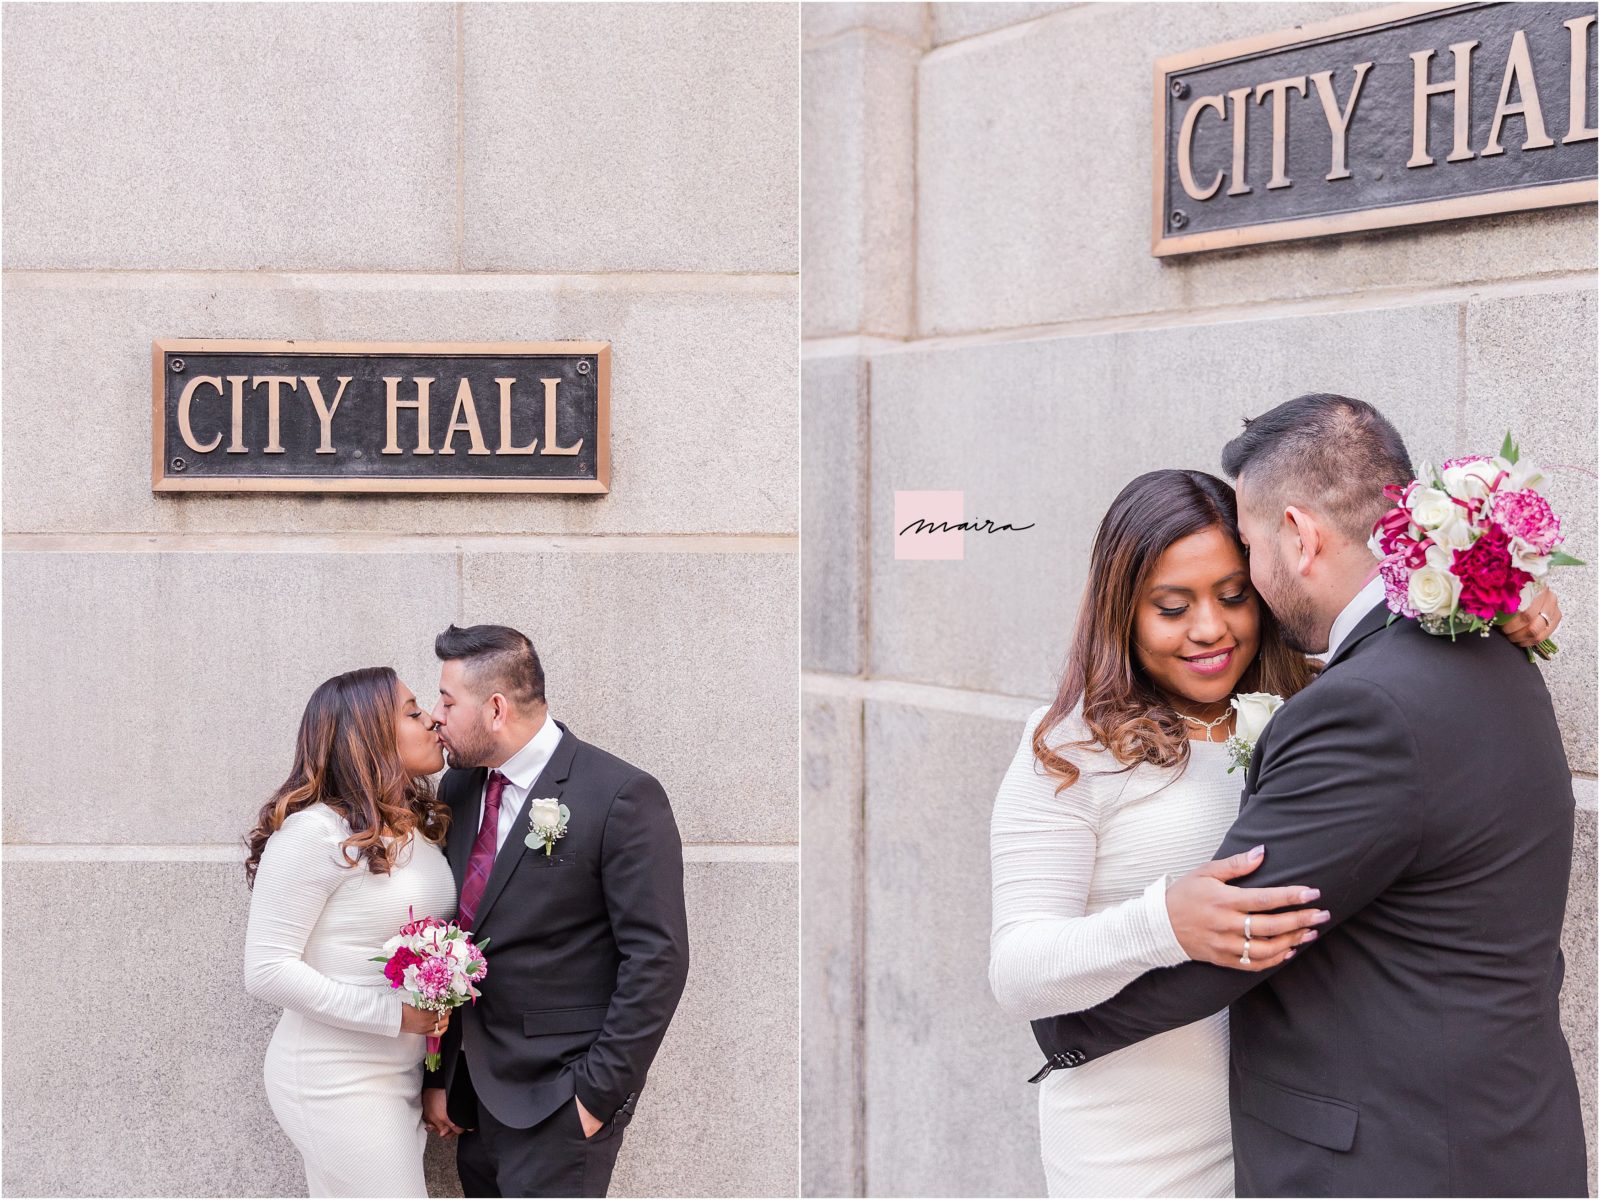 Chicago Courthouse wedding, City Hall wedding, Courthouse wedding photographer, Elope, Elopement photographer, City Hall Ceremony, Judge, Chicago Wedding, Married